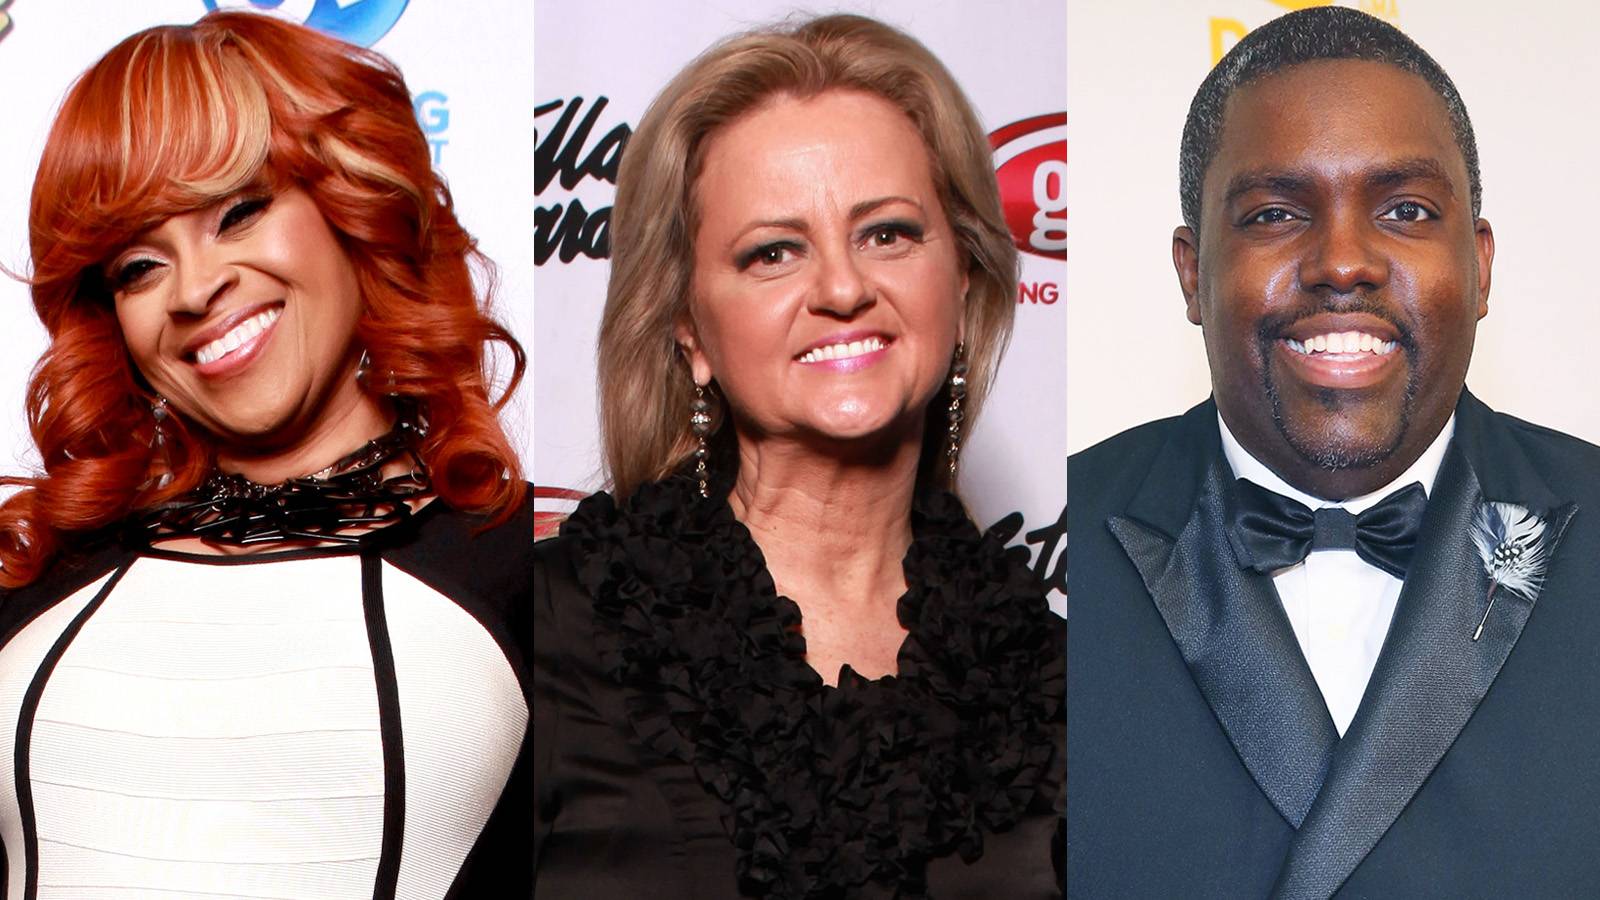 Bobby Jones Gospel Welcomes Karen Clark Sheard, Vicki Yohe and More - Check these gospel stars out on Bobby Jones Gospel in the BET Now app to see them perform and chat with Dr. Jones during the farewell season. (Photos from left: Royce DeGrie/Getty Images for UP Entertainment, Royce DeGrie/Getty Images for GMC TV, Terry Wyatt/Getty Images for Dove Awards)